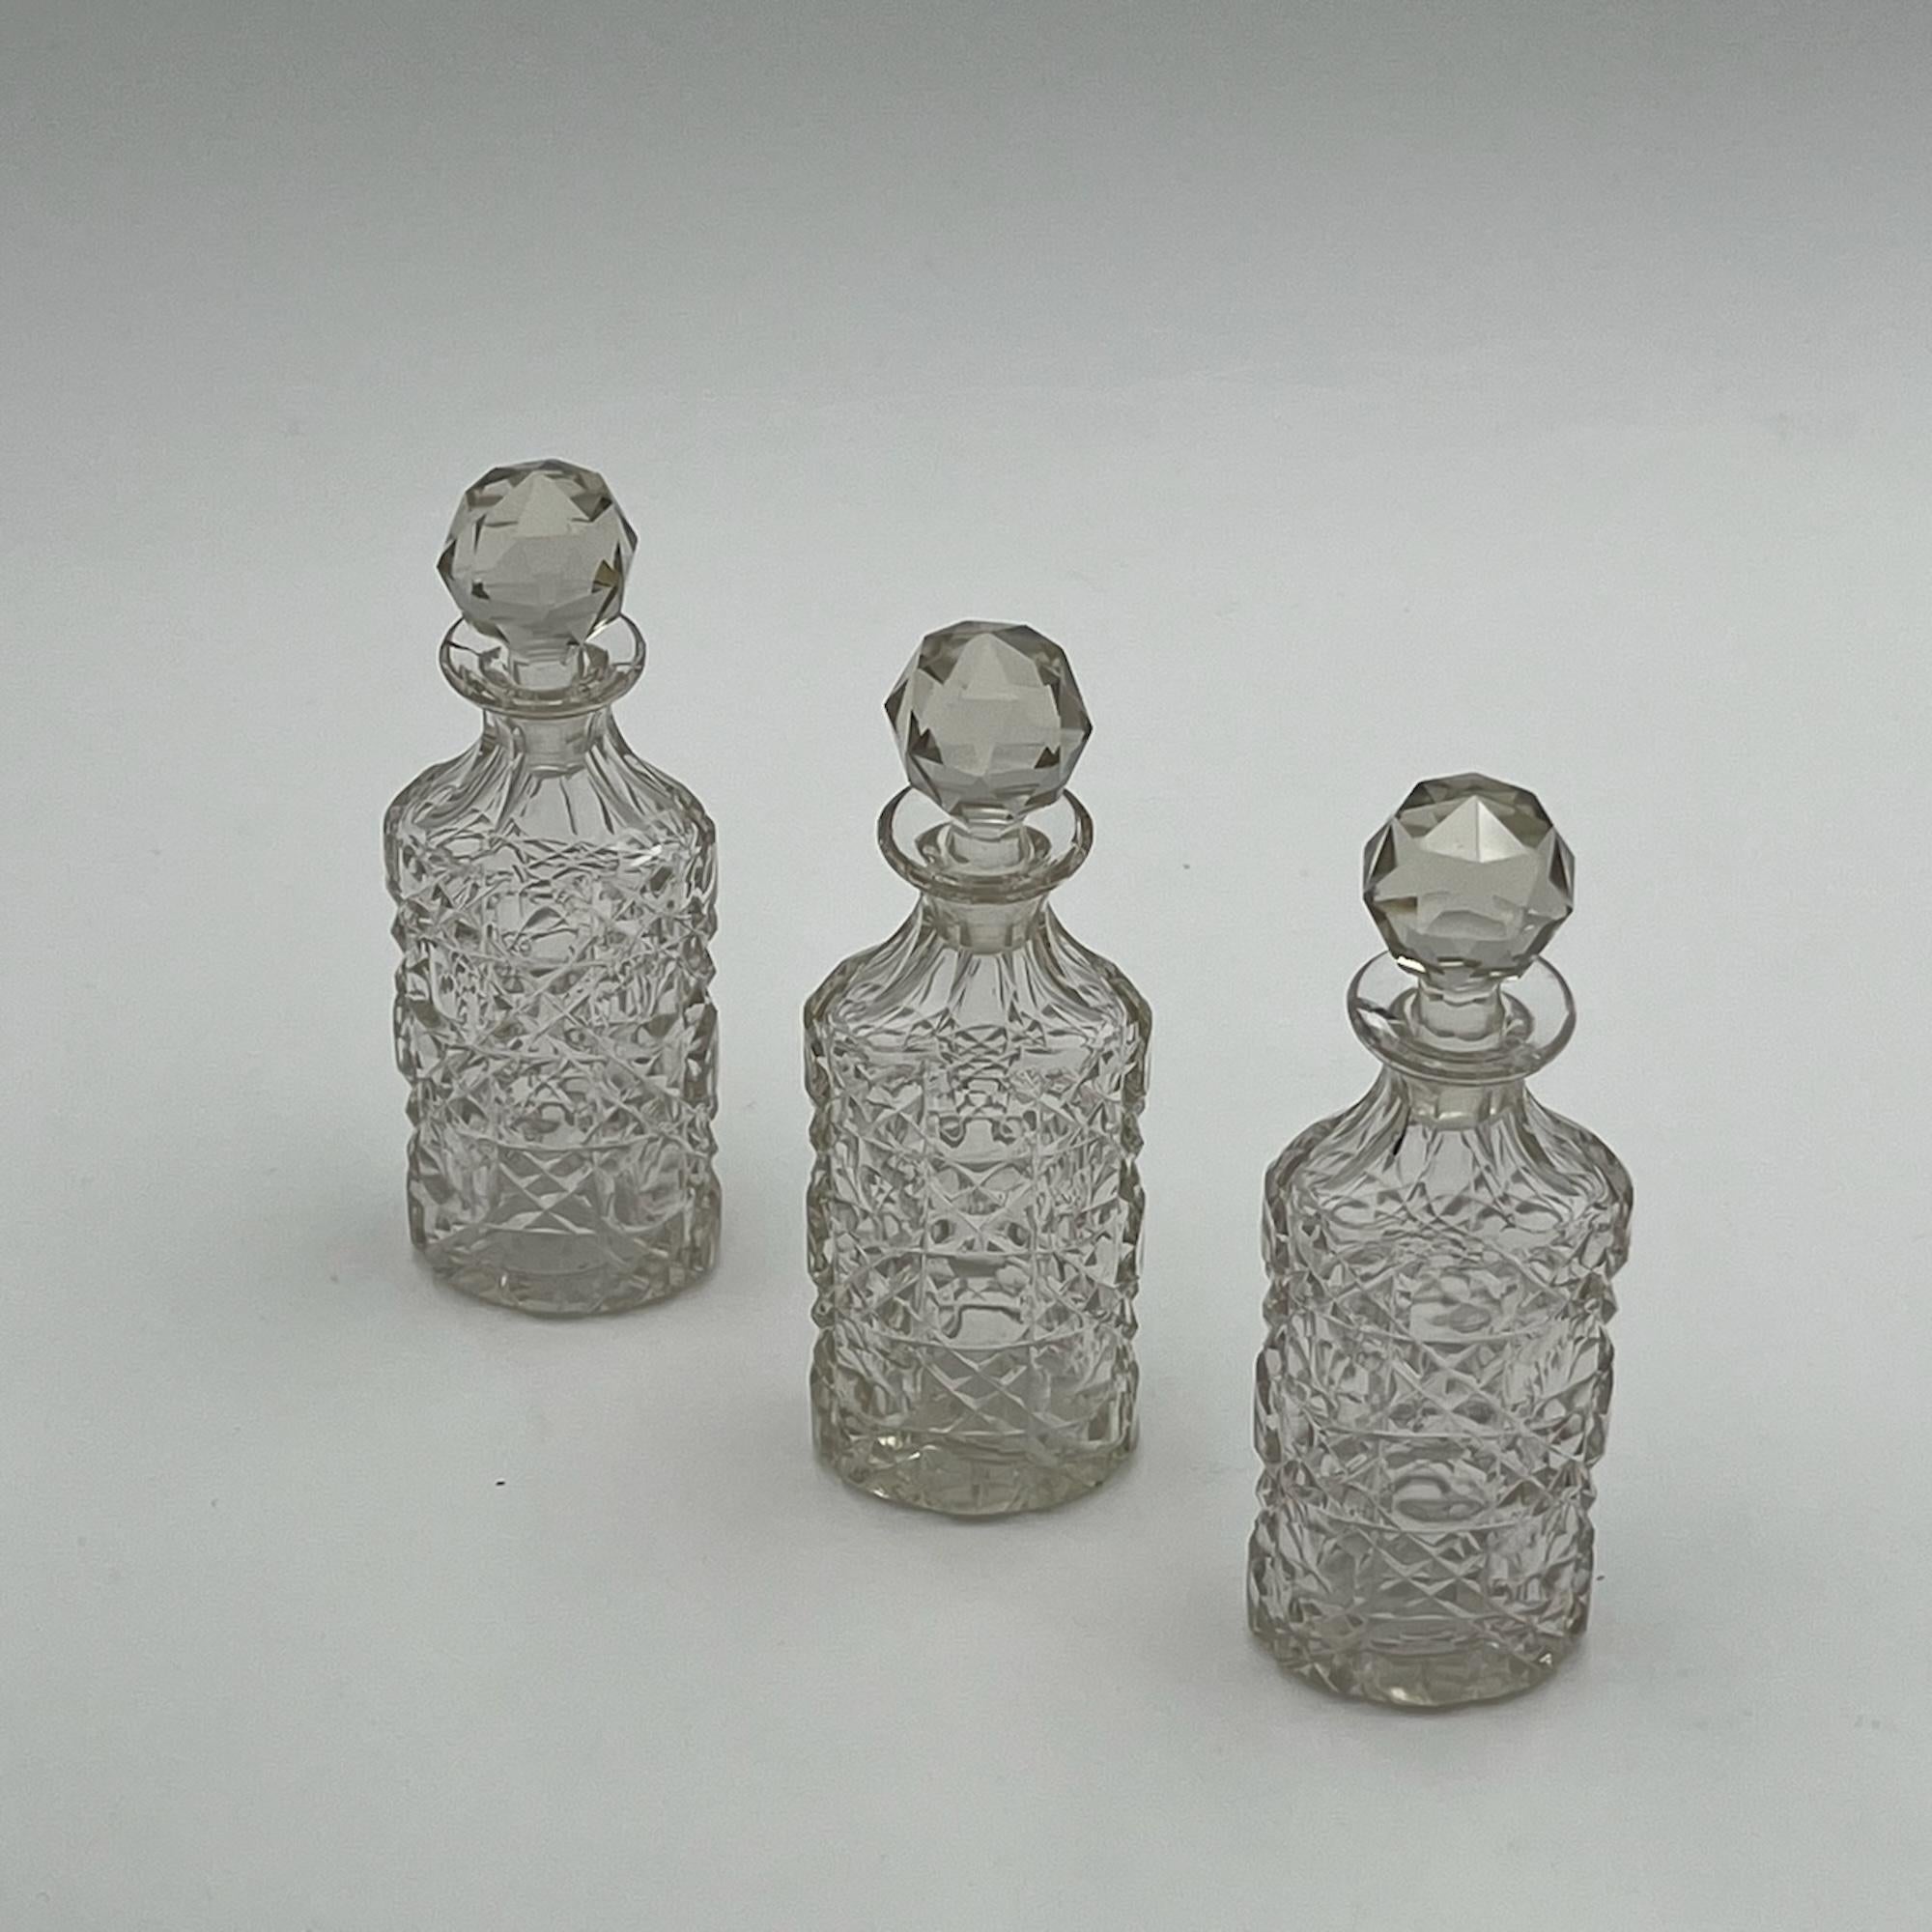 Rare 1940s Crystal Ampoule Set with Accessories - English Craftsmanship 3